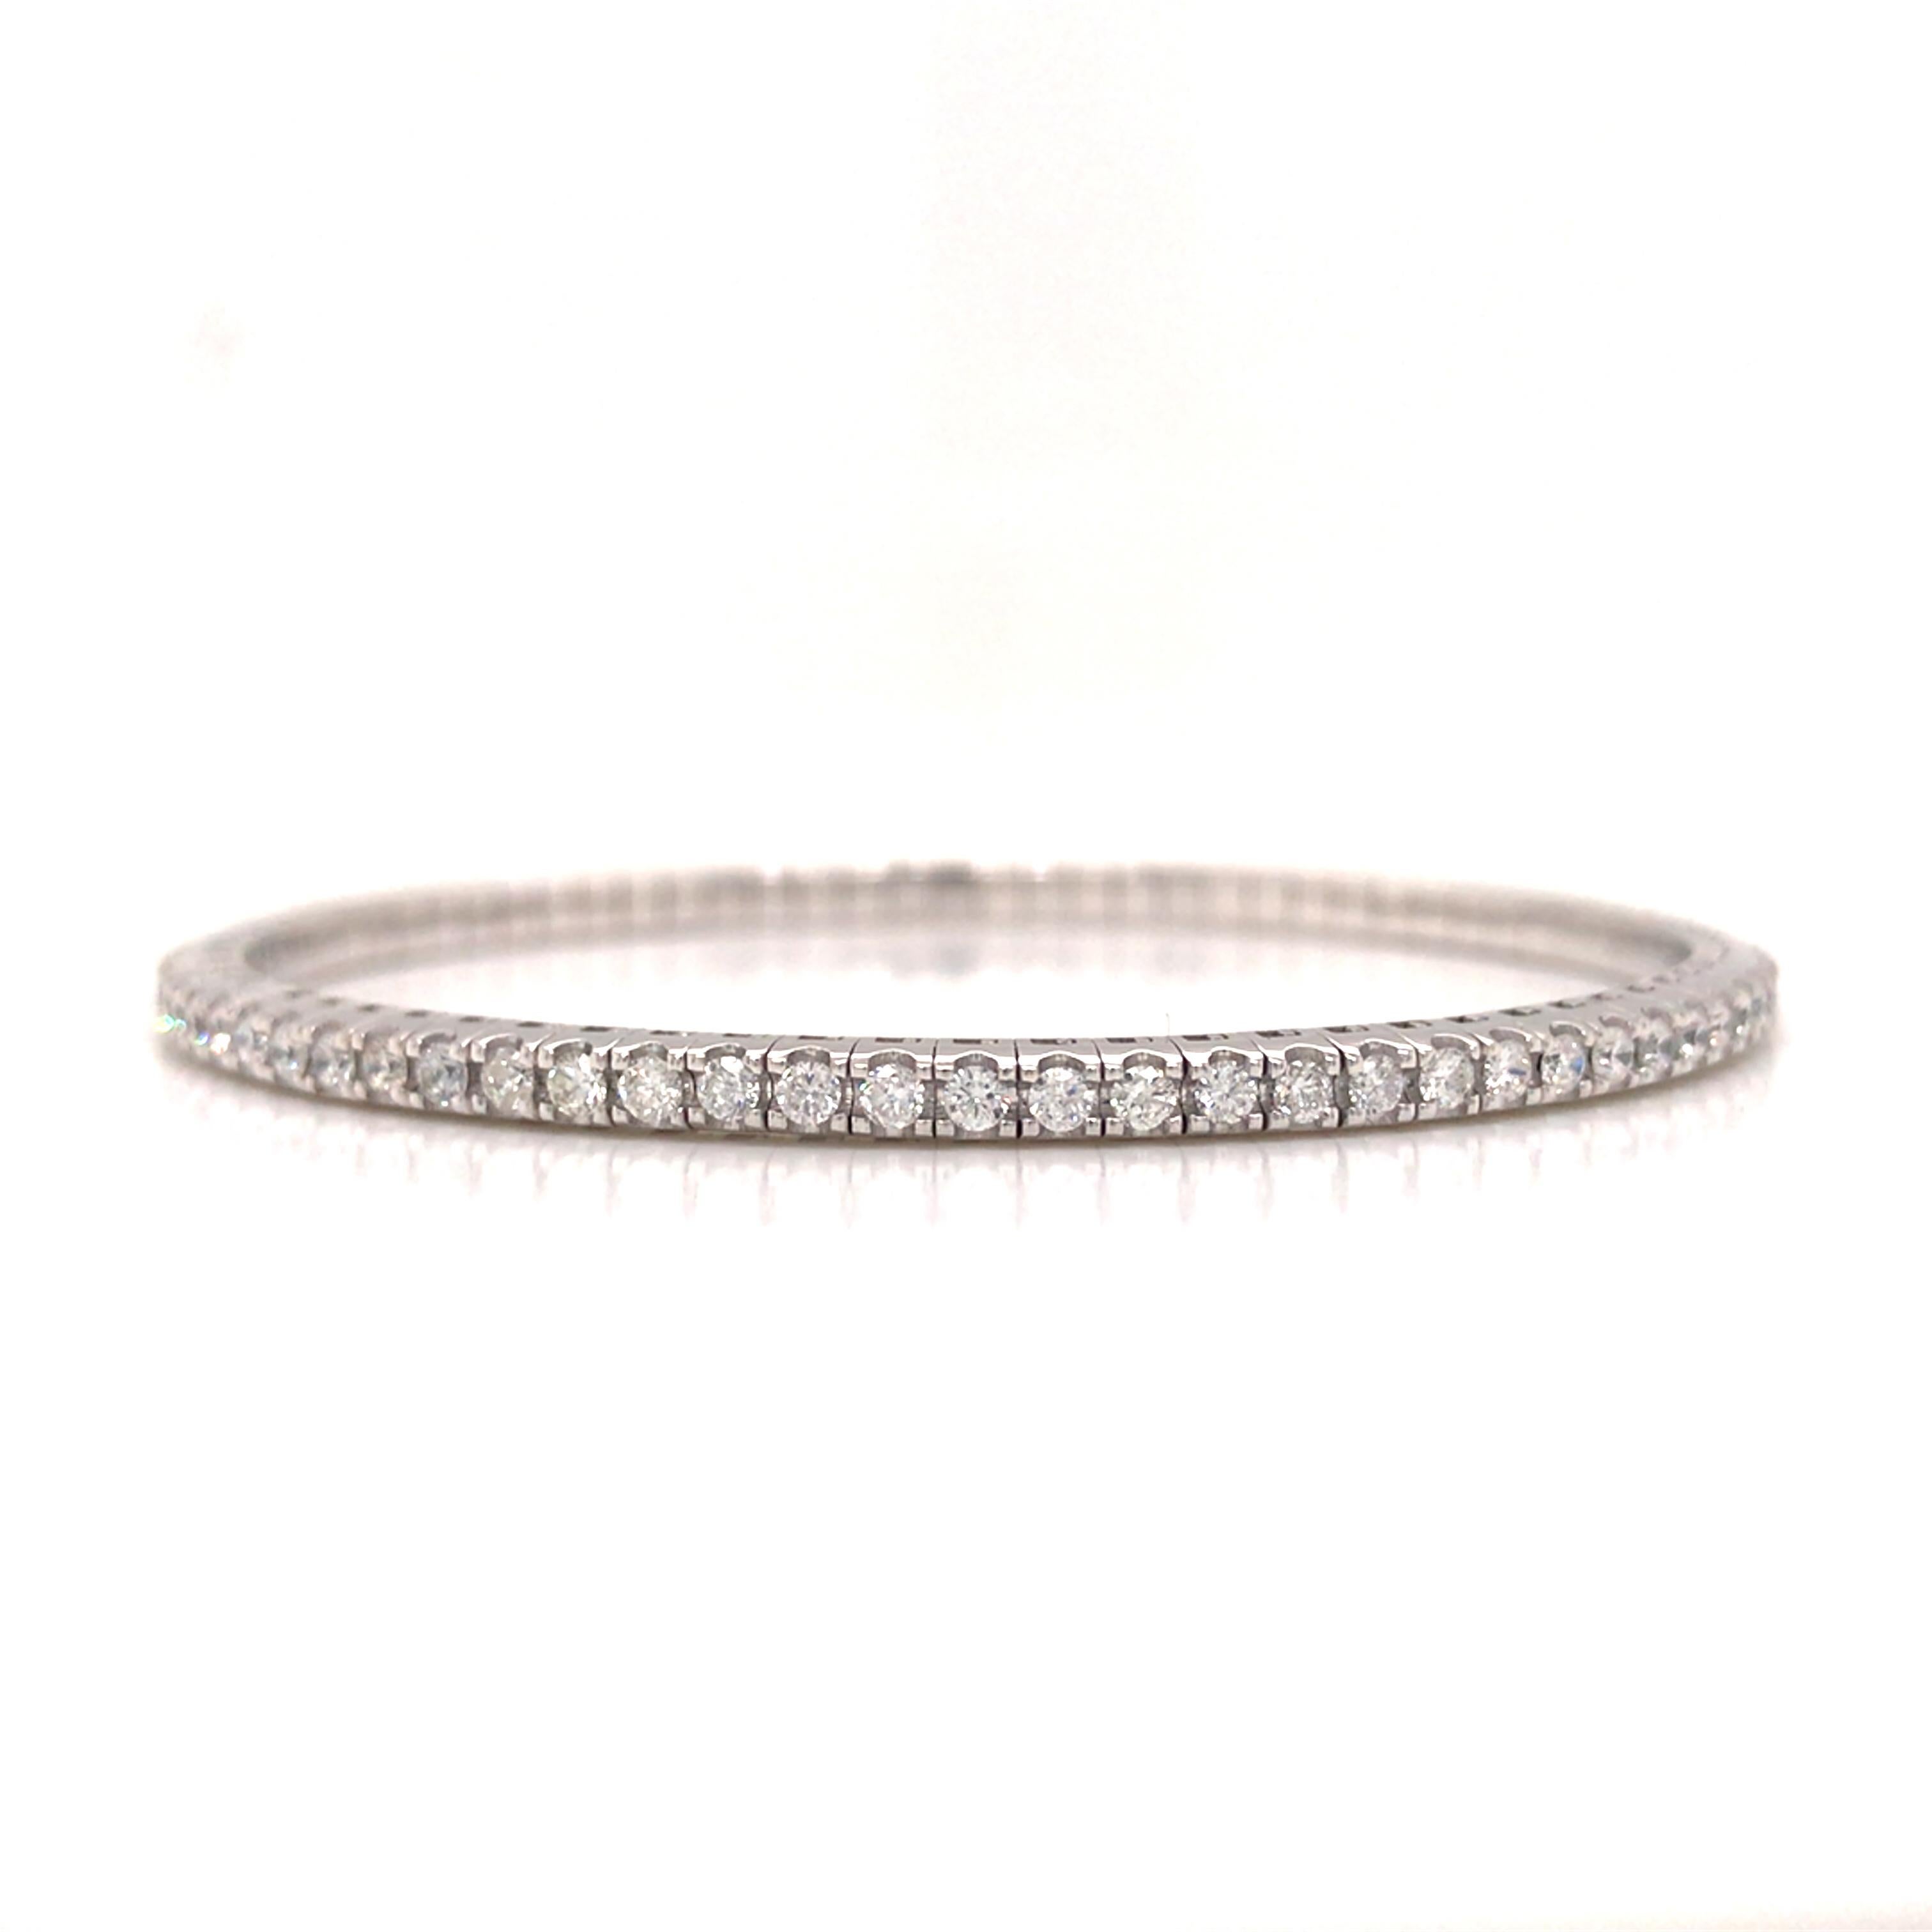 Diamond Flexible Stretchable Bangle in 18K White Gold. (78) Round Brilliant Cut Diamonds weighing 2.10 carat total weight, G-H in color and VS-SI in clarity are expertly set. The Bracelet measures 6 1/2 inch inner circumference and 1/8 inch in